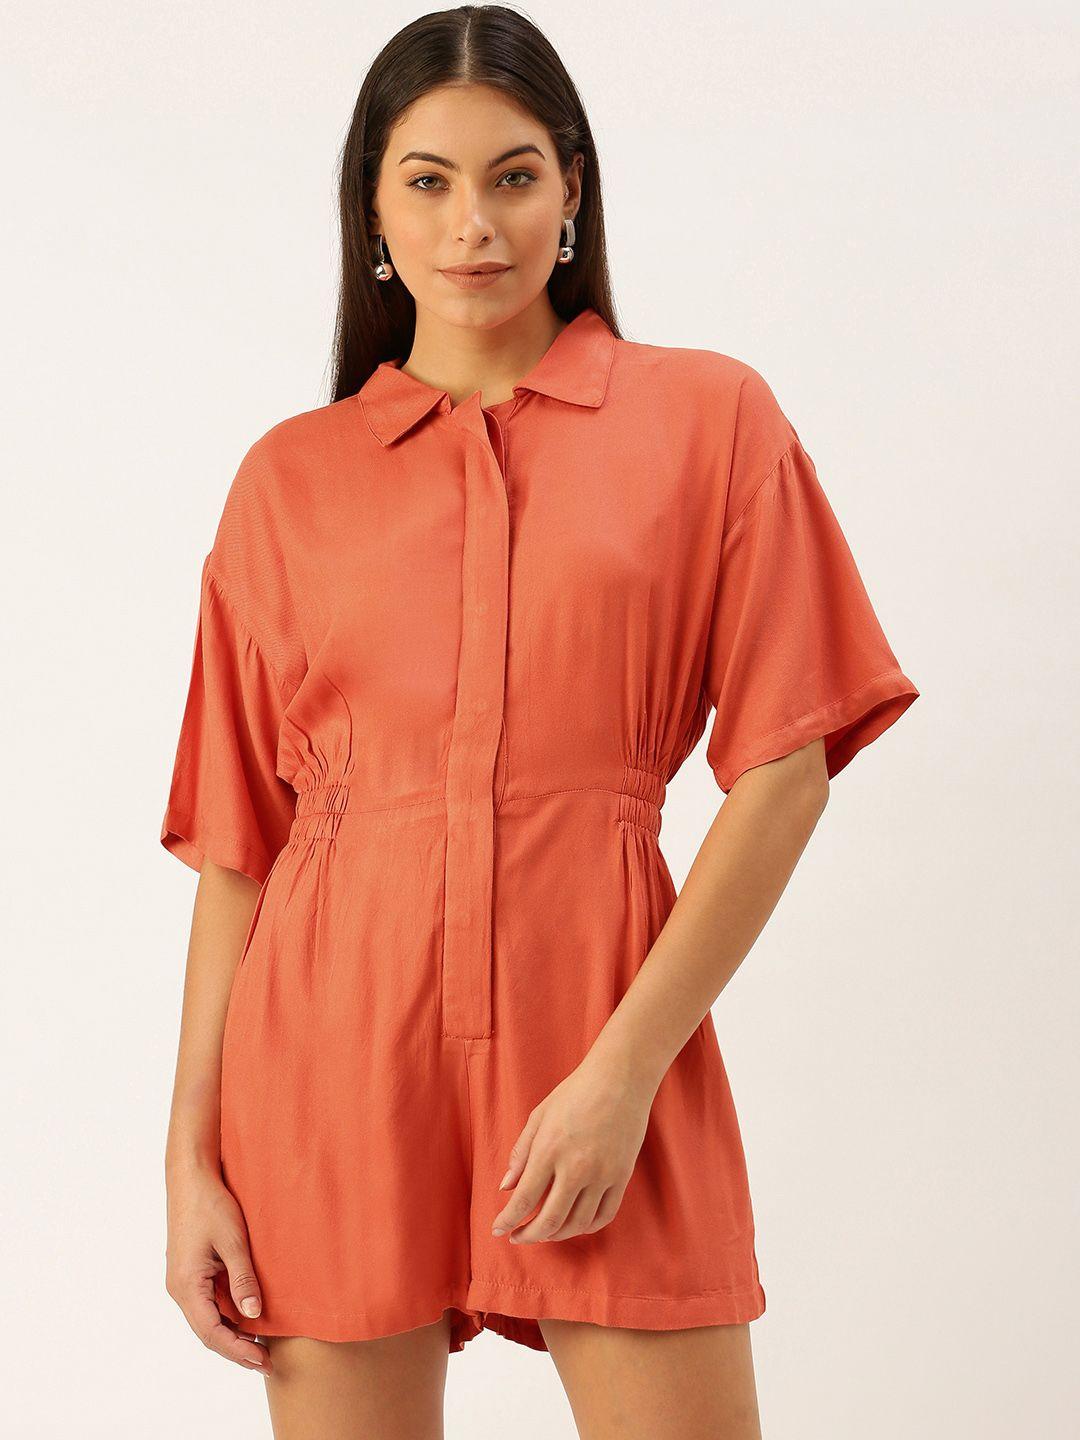 forever-21-women-coral-red-solid-shirt-collar-playsuit